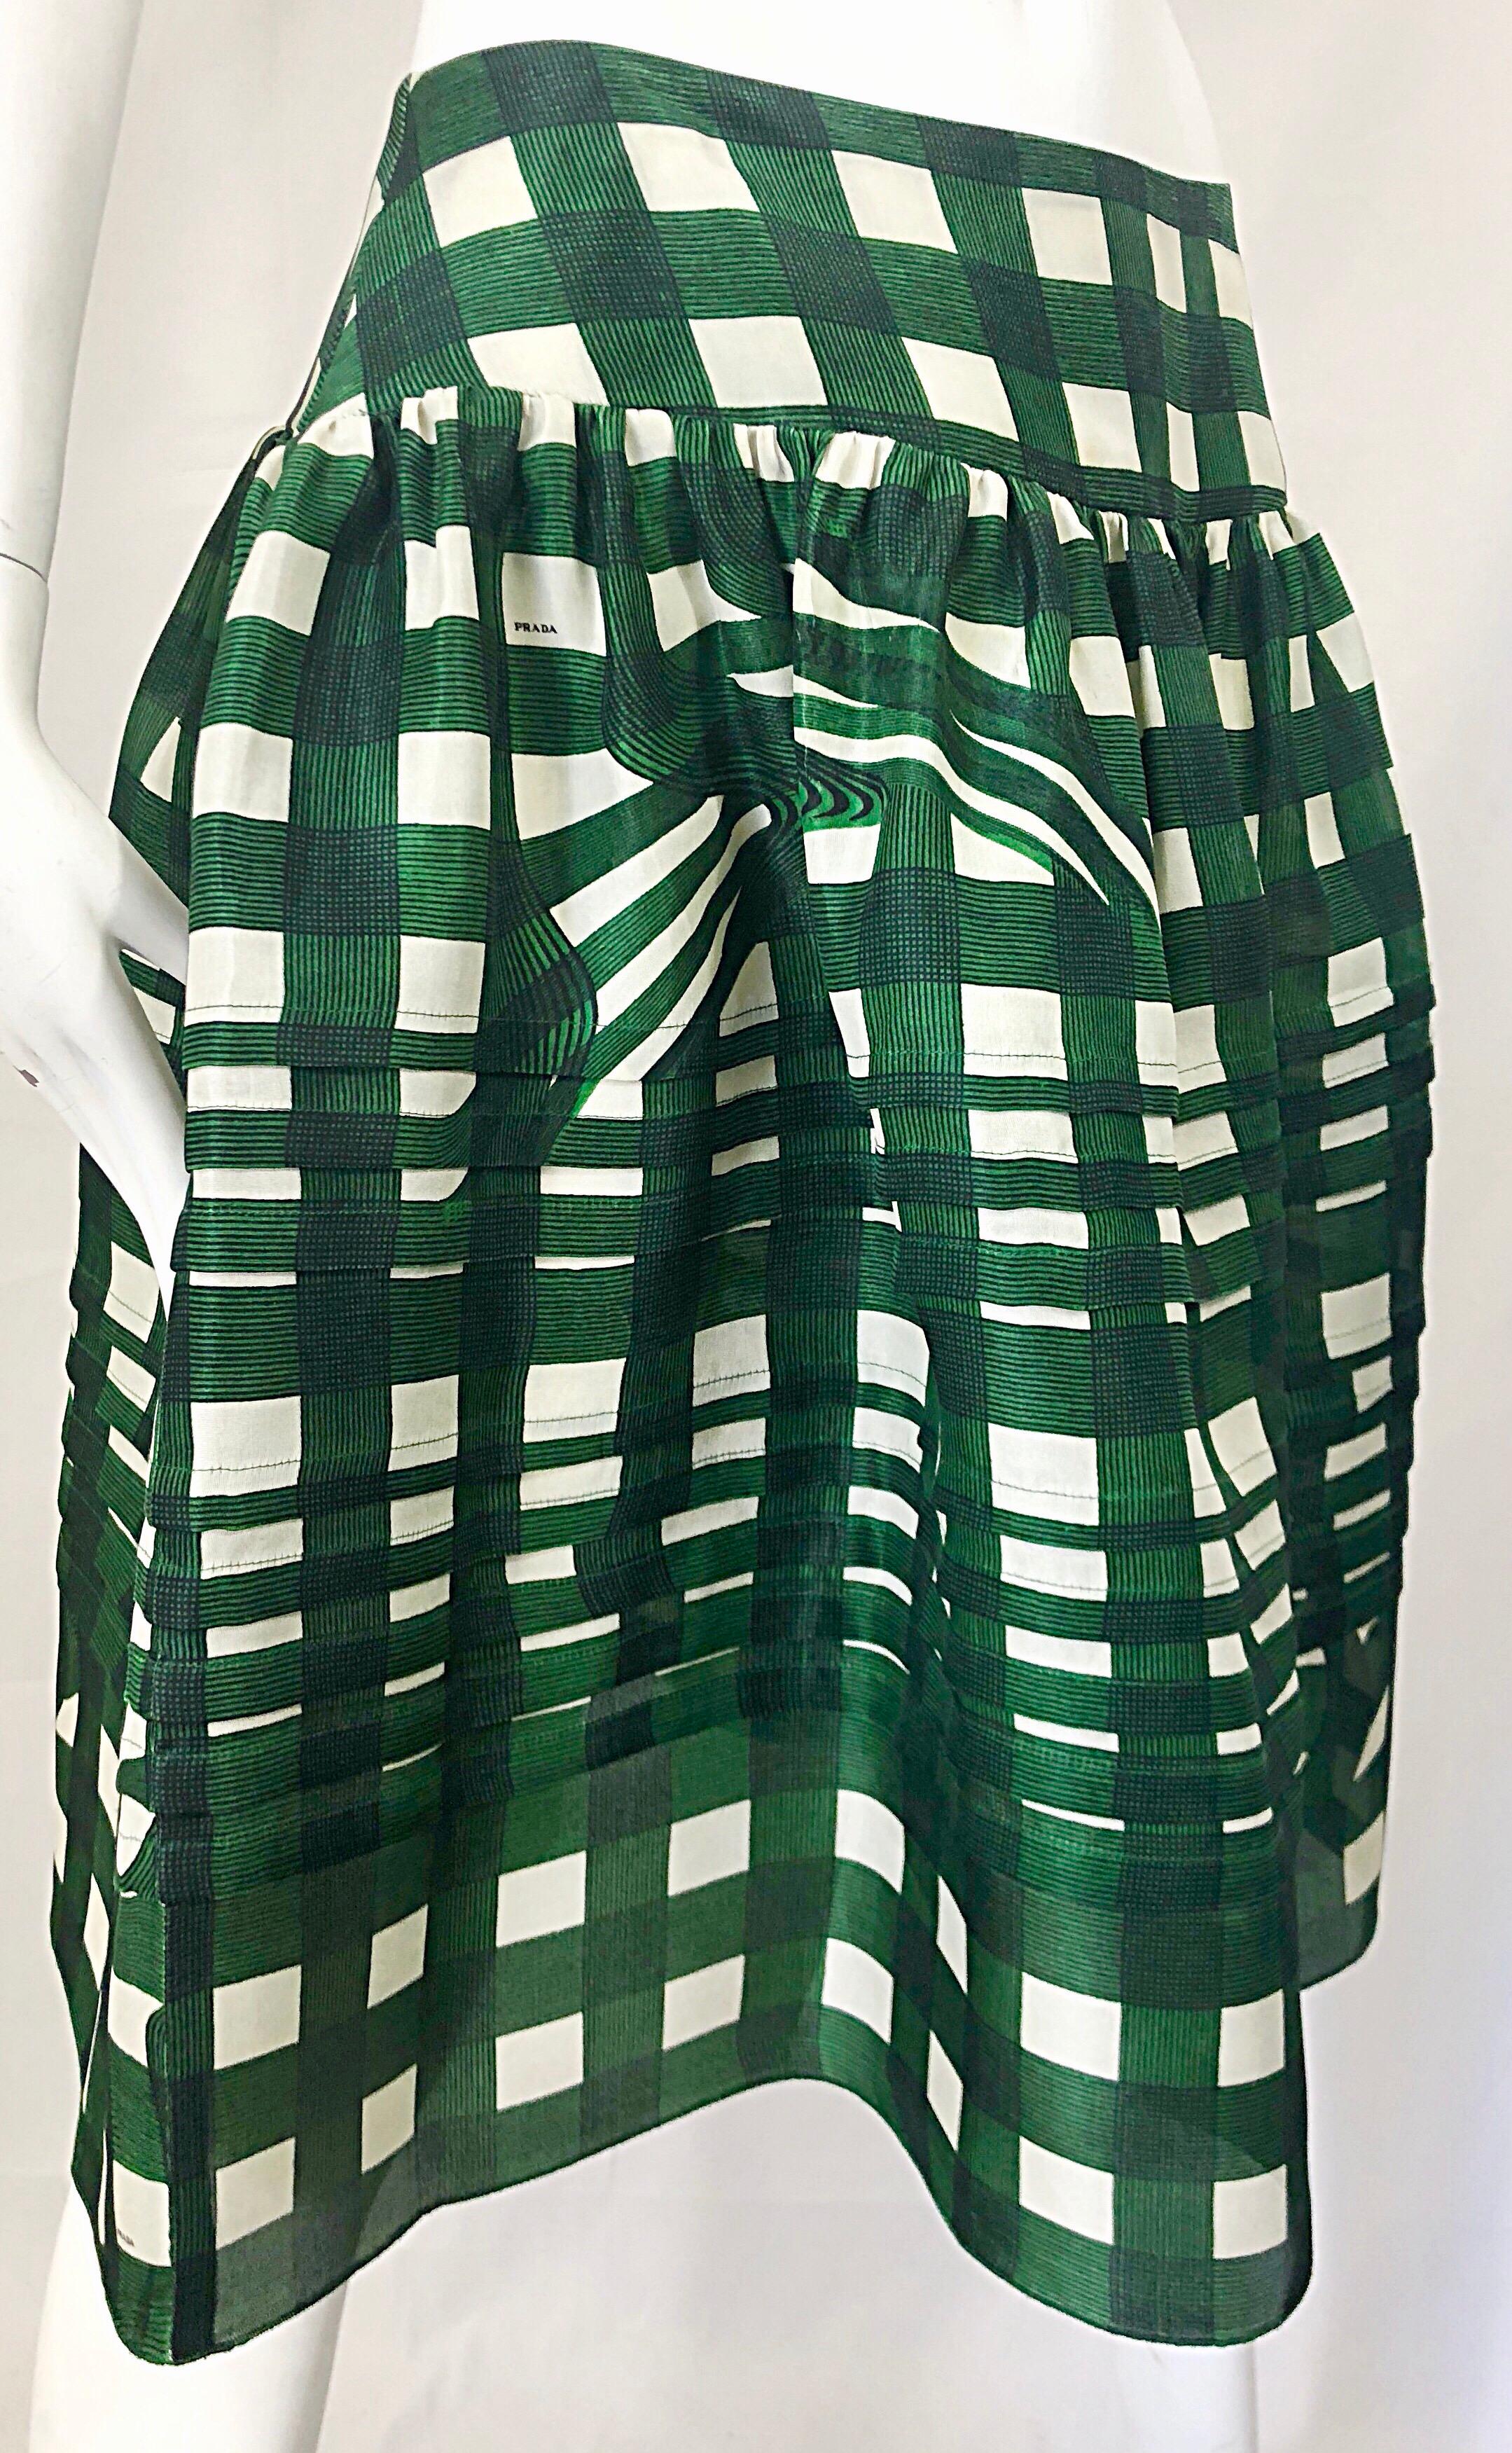 Blue Prada Spring 2008 Runway Fairy Collection Green + White A - Line Skirt Size 40 